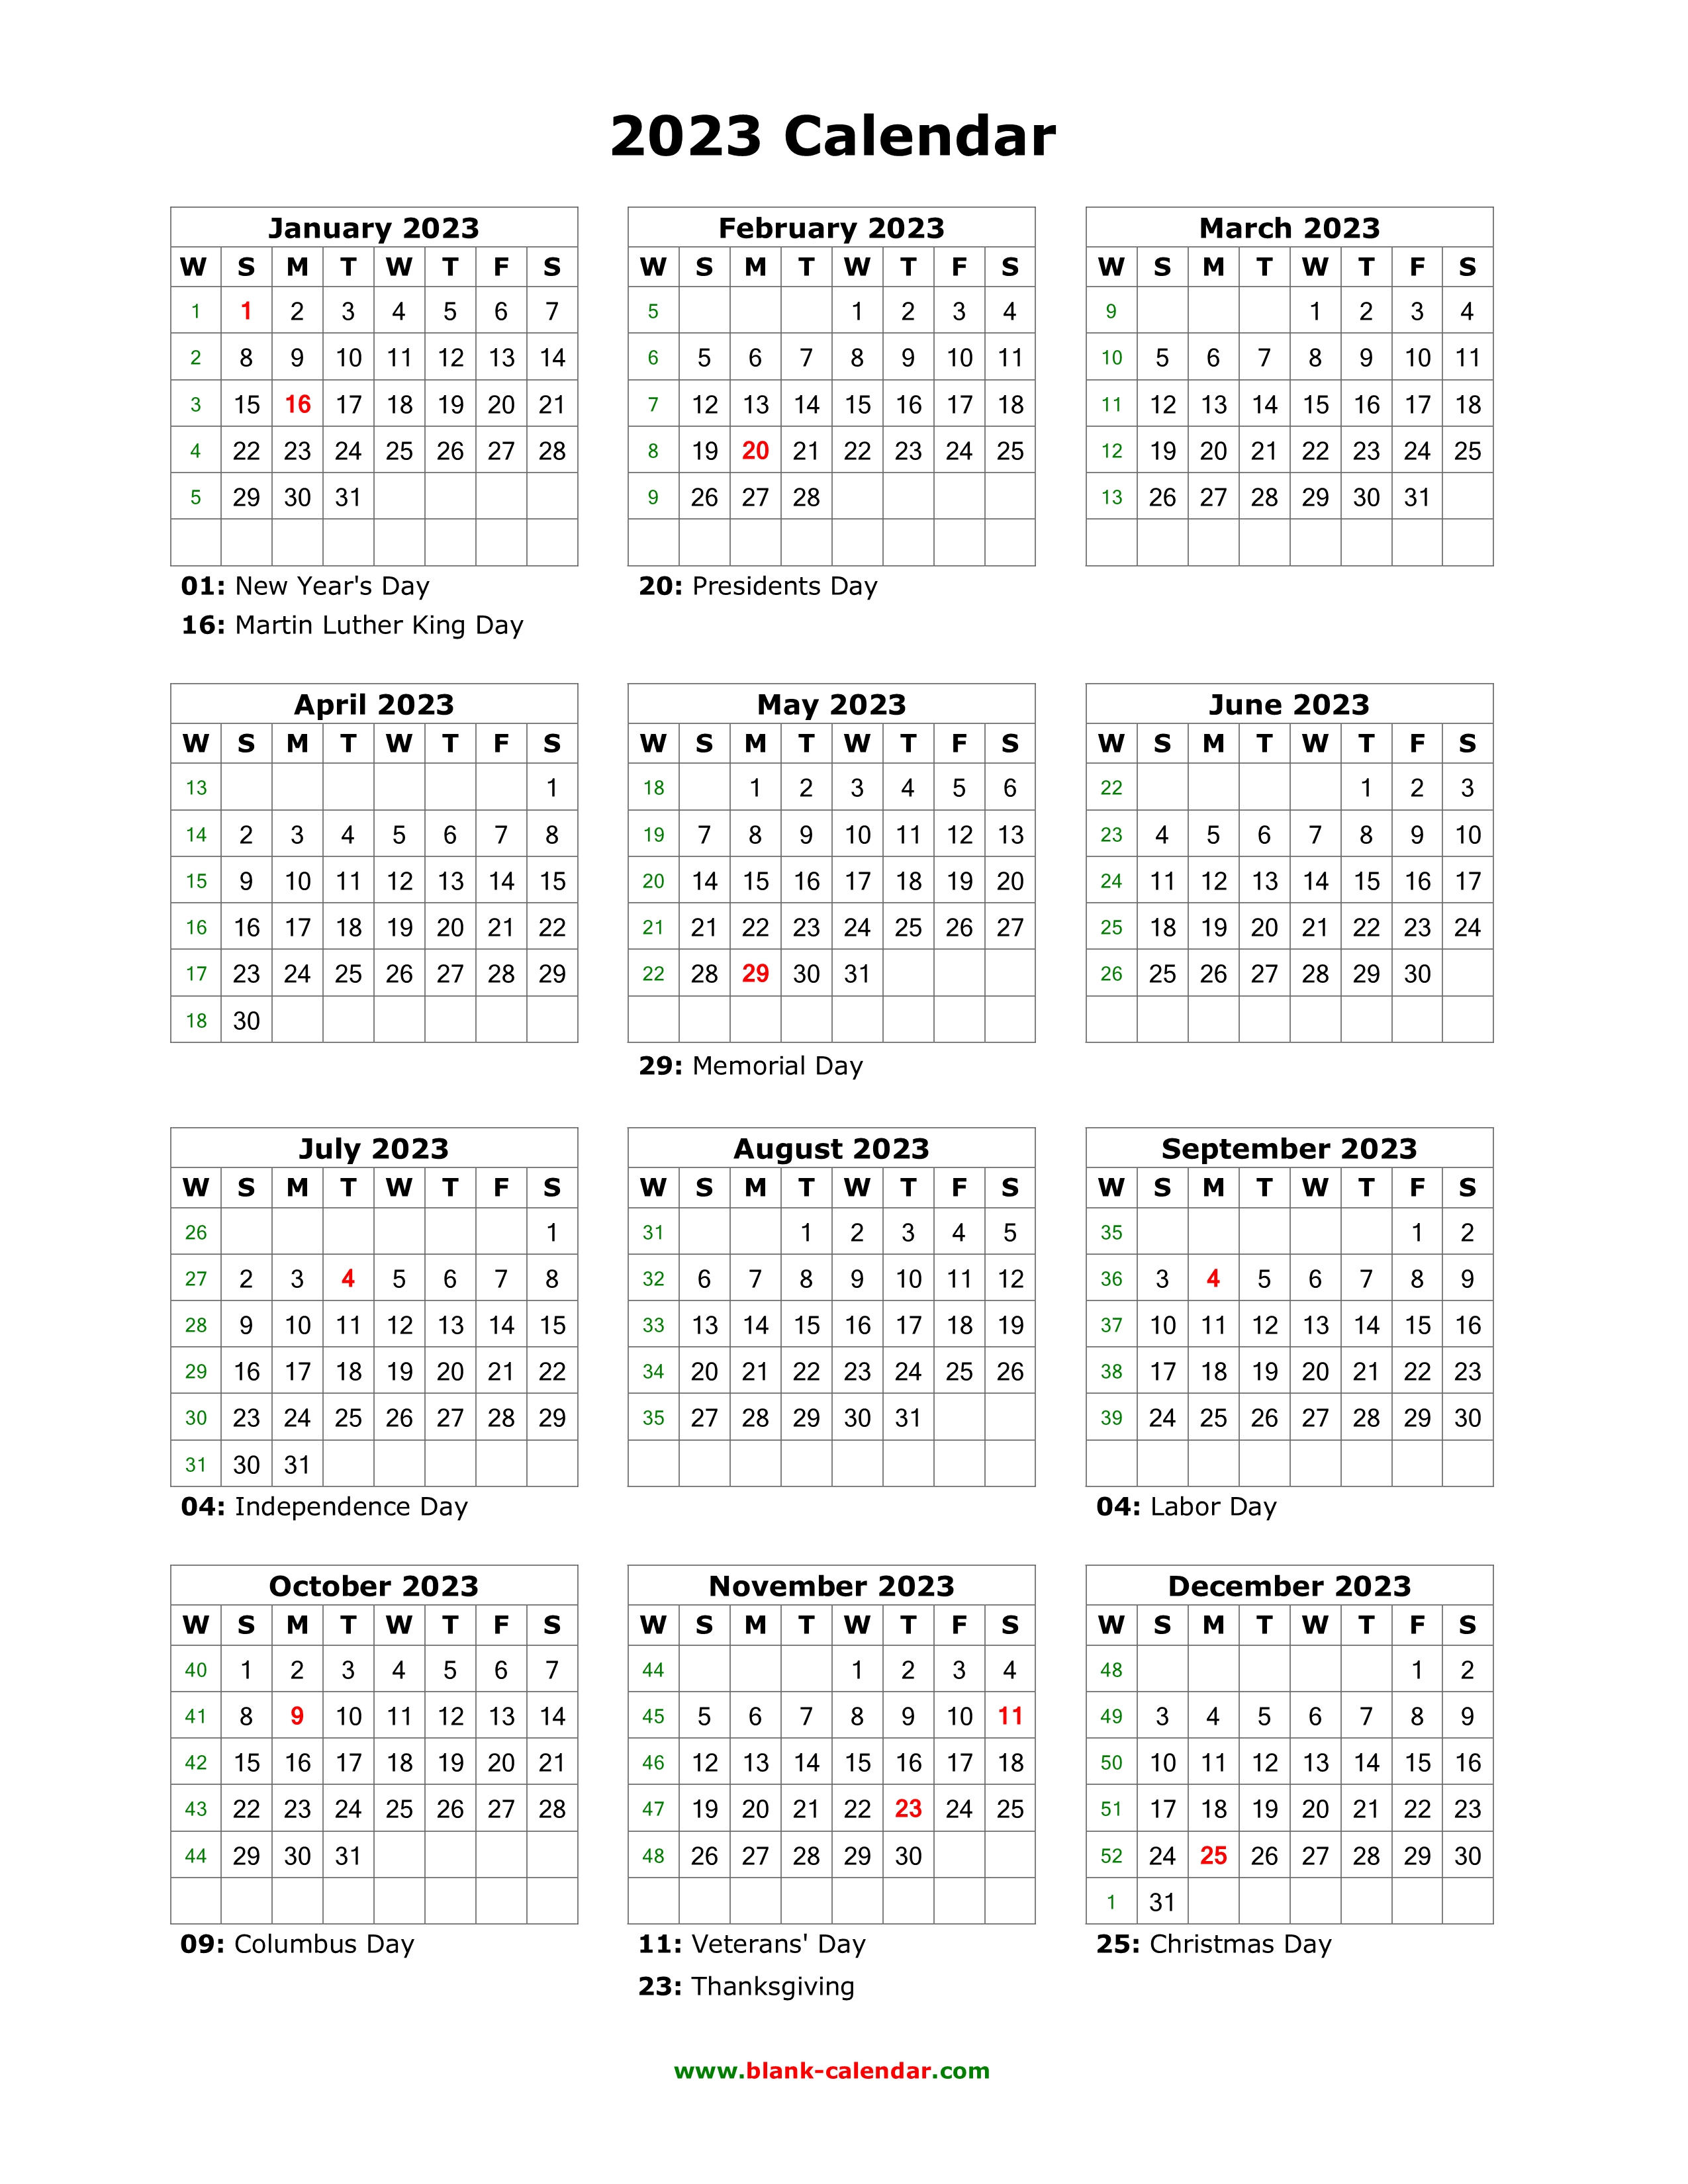 2023 Calendar Templates And Images 2023 United States Calendar With 